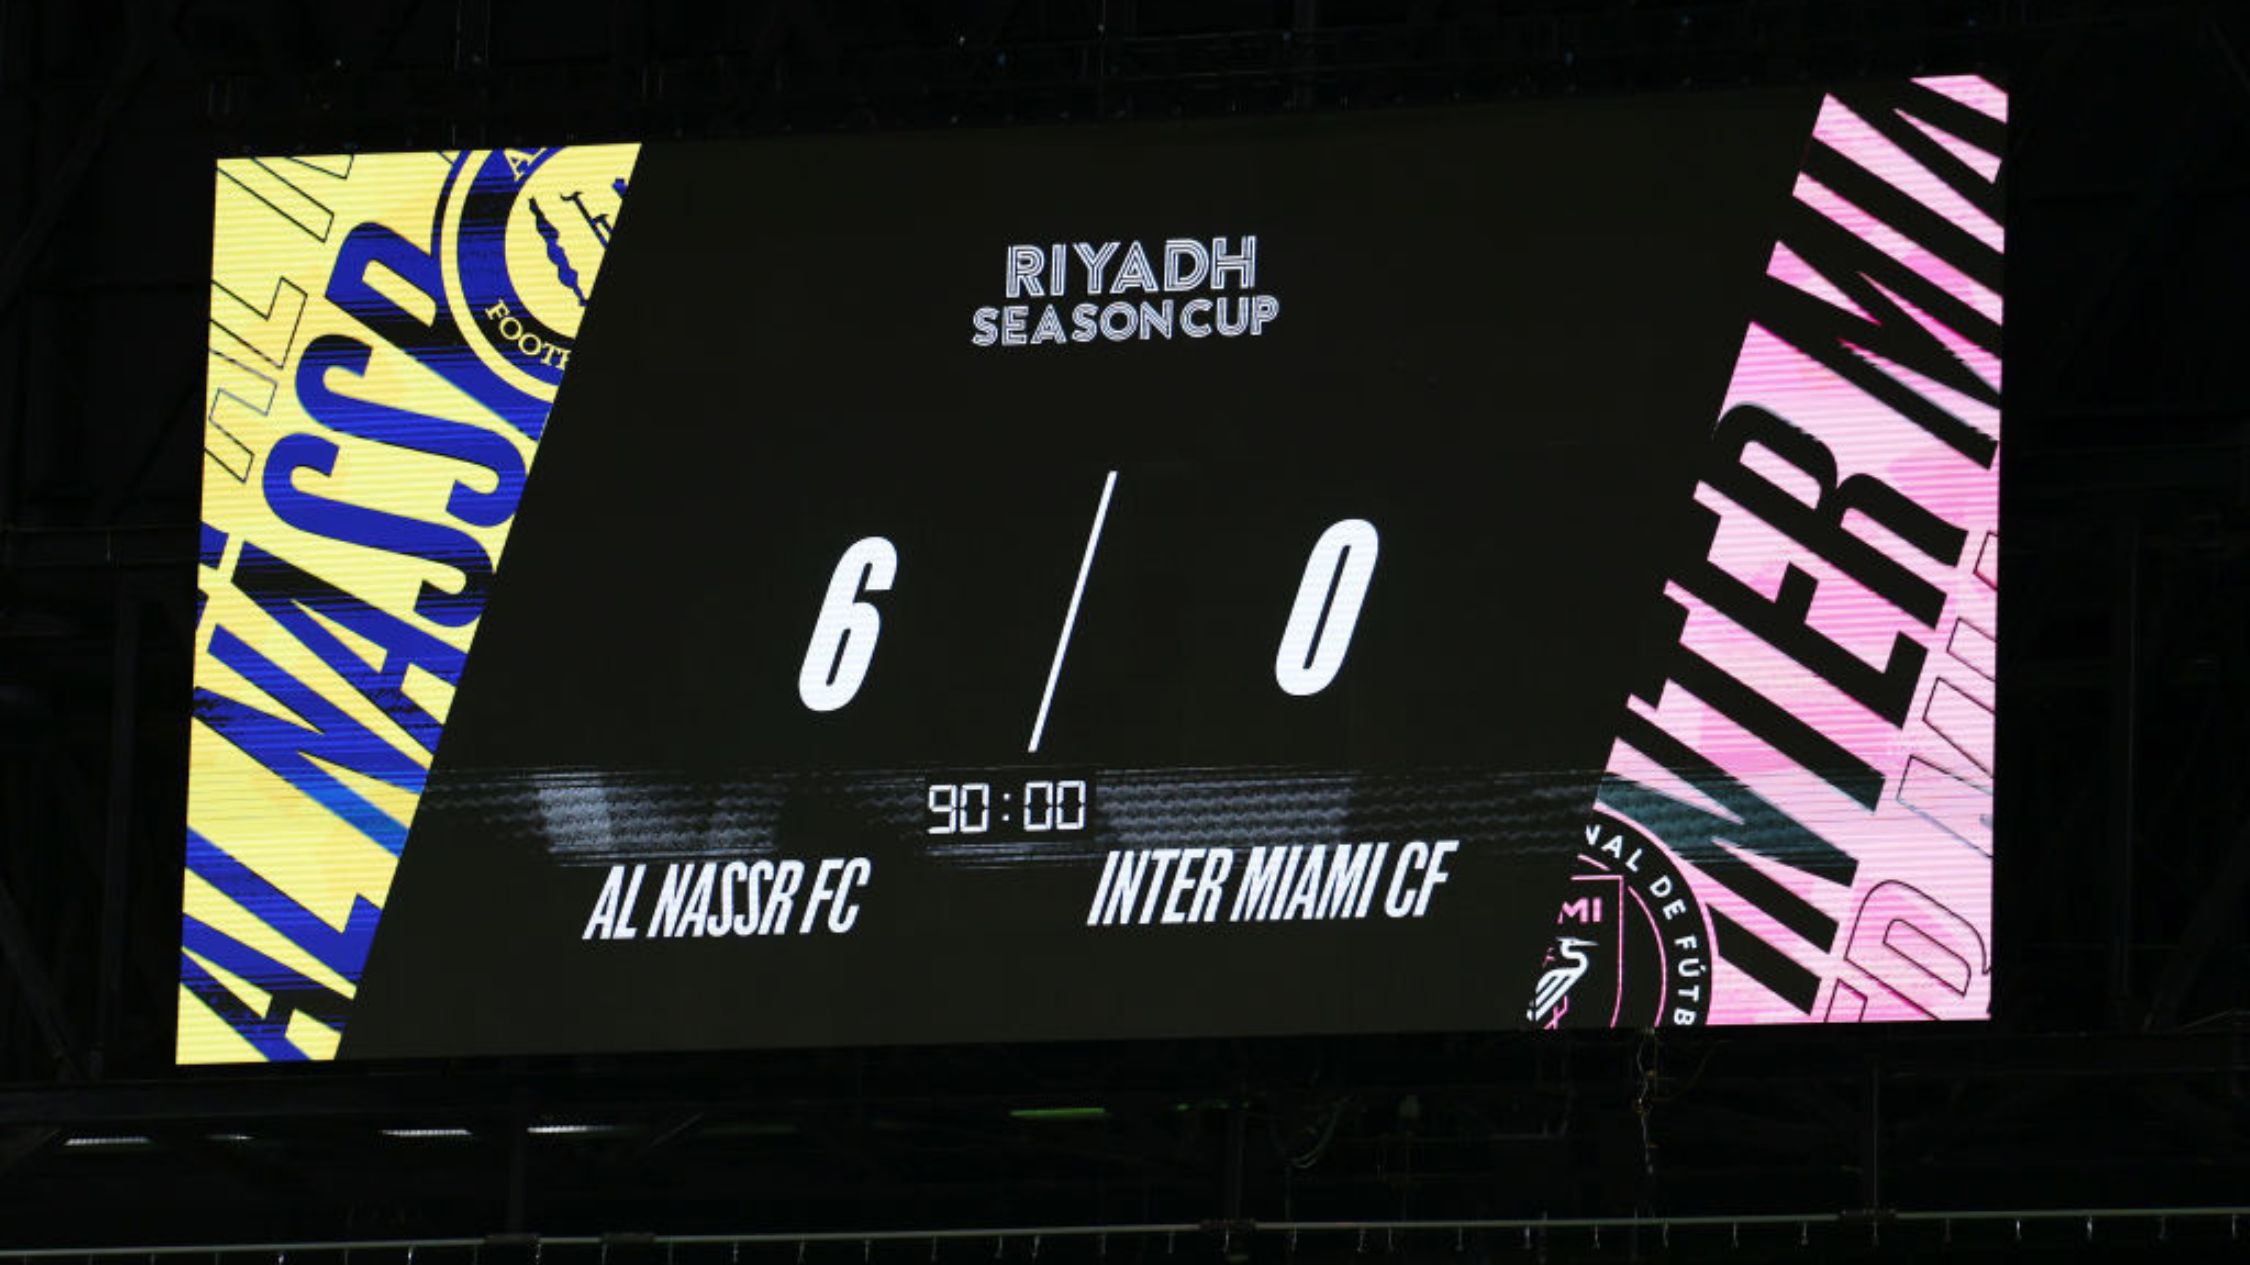 Without Cristiano and with Messi for only 10 minutes, Al-Nassr crushes Inter Miami 6-0